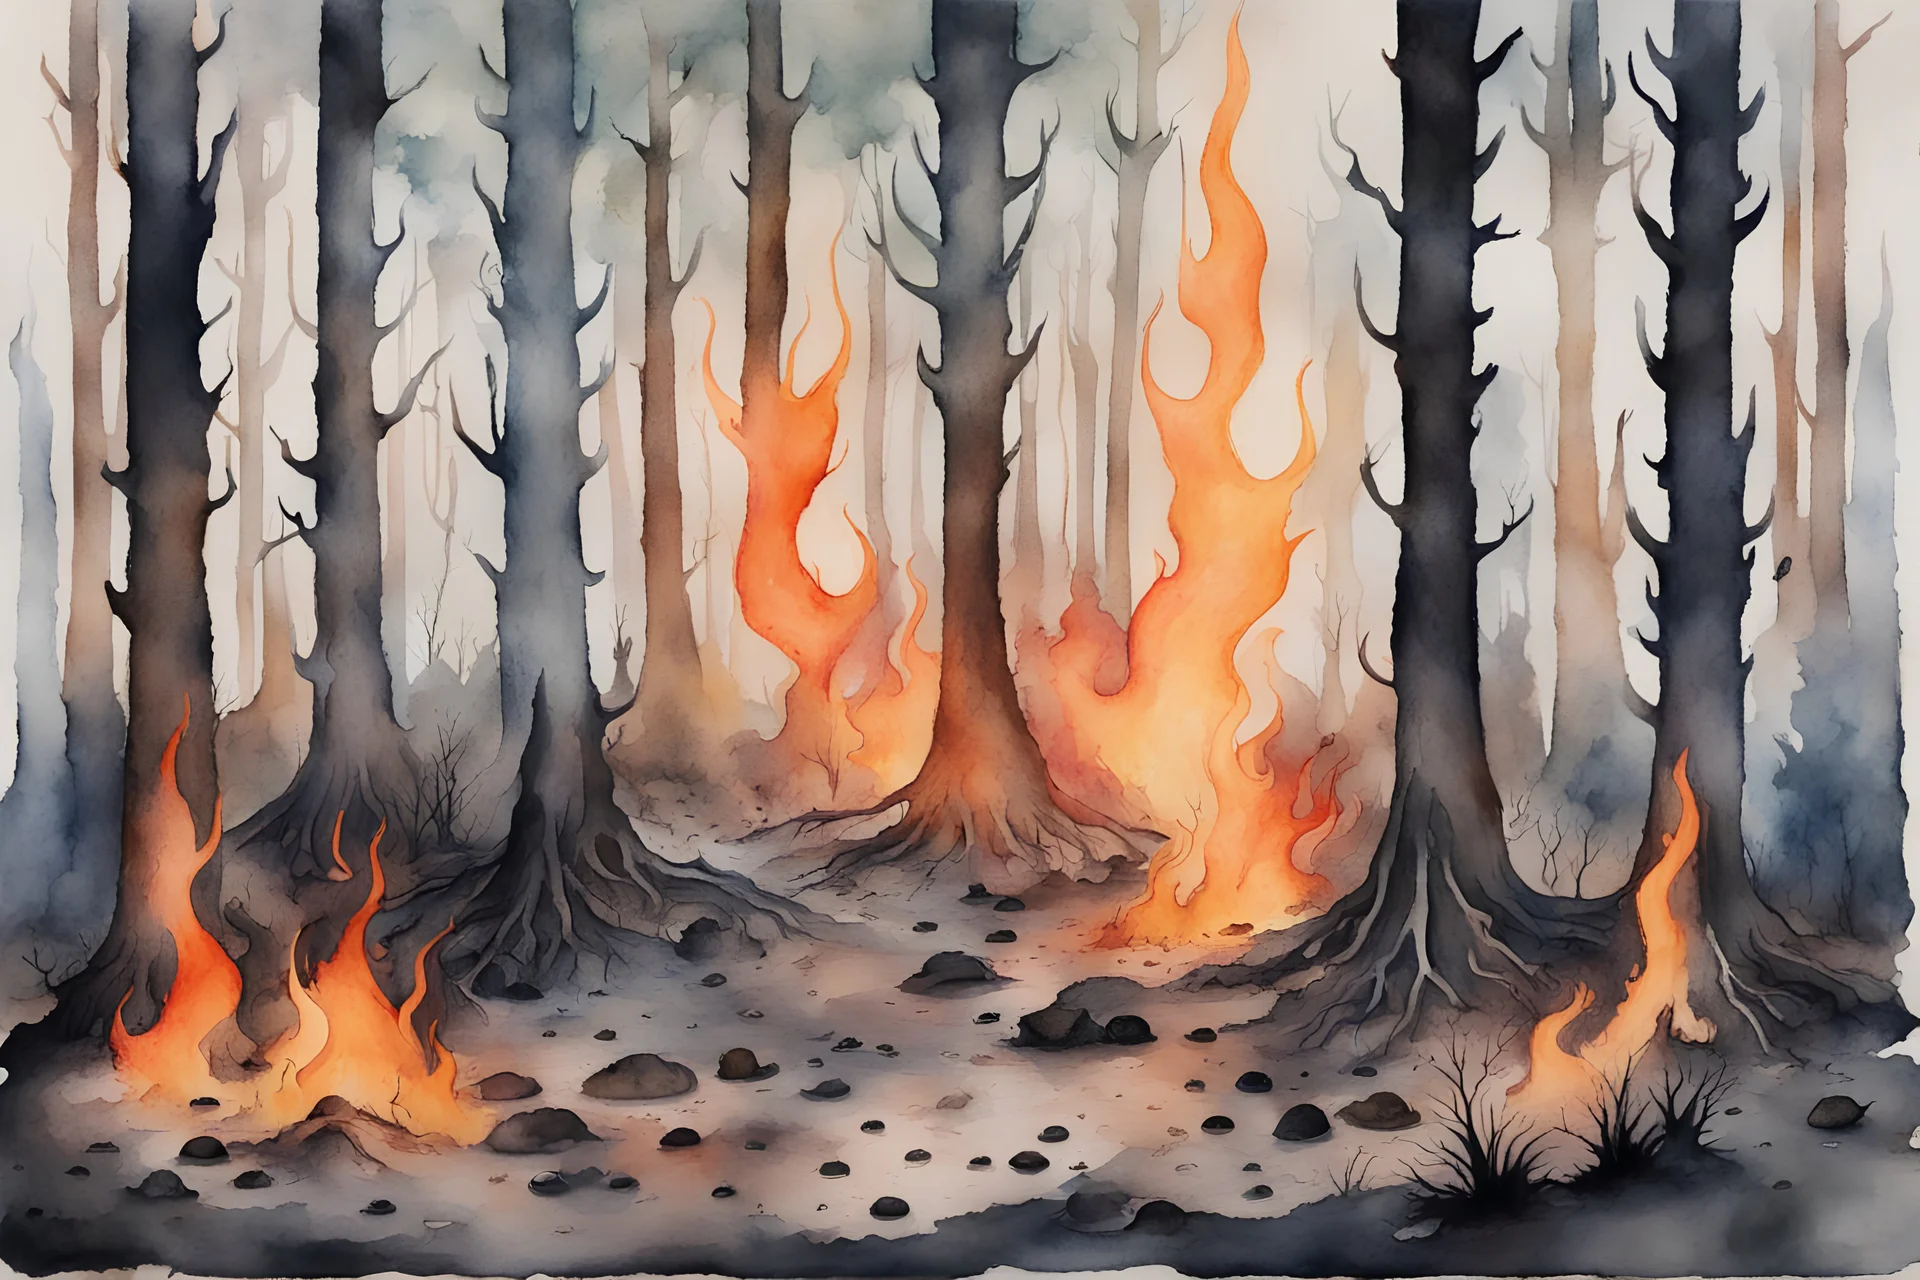 Forest Fire by Ellcryss on DeviantArt